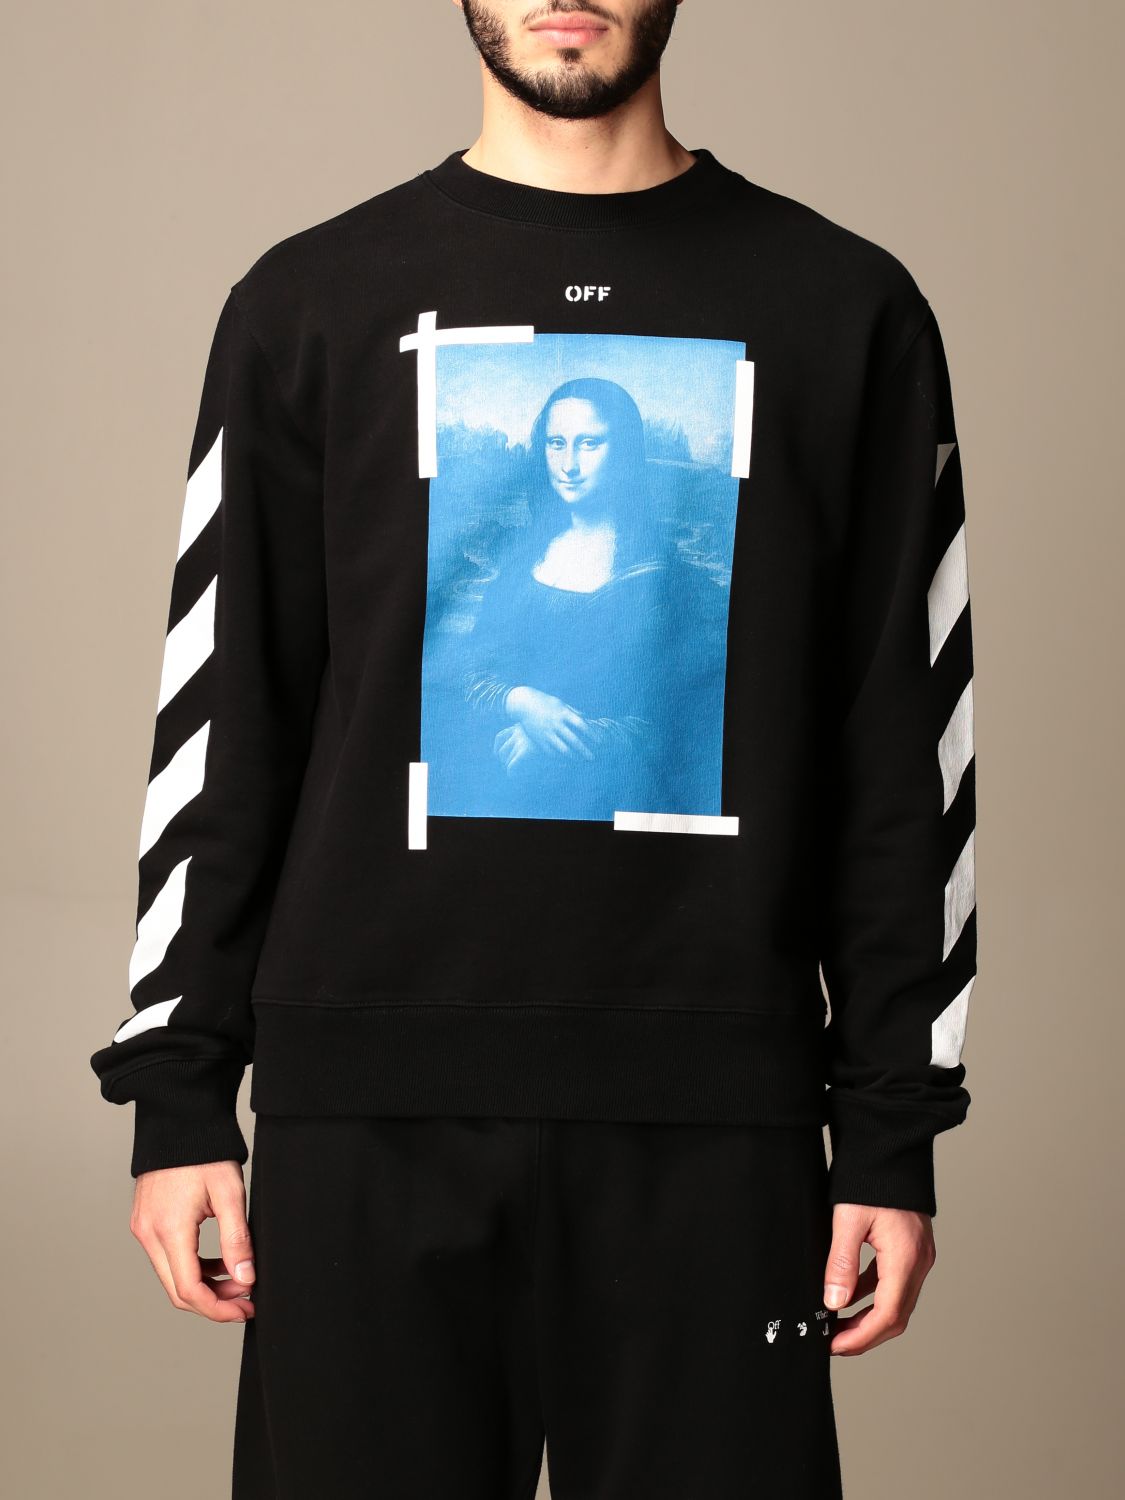 | crewneck OMBA025R21FLE003 sweatshirt Off-White with print sweatshirt cotton OFF-WHITE: at White Black in - Off online